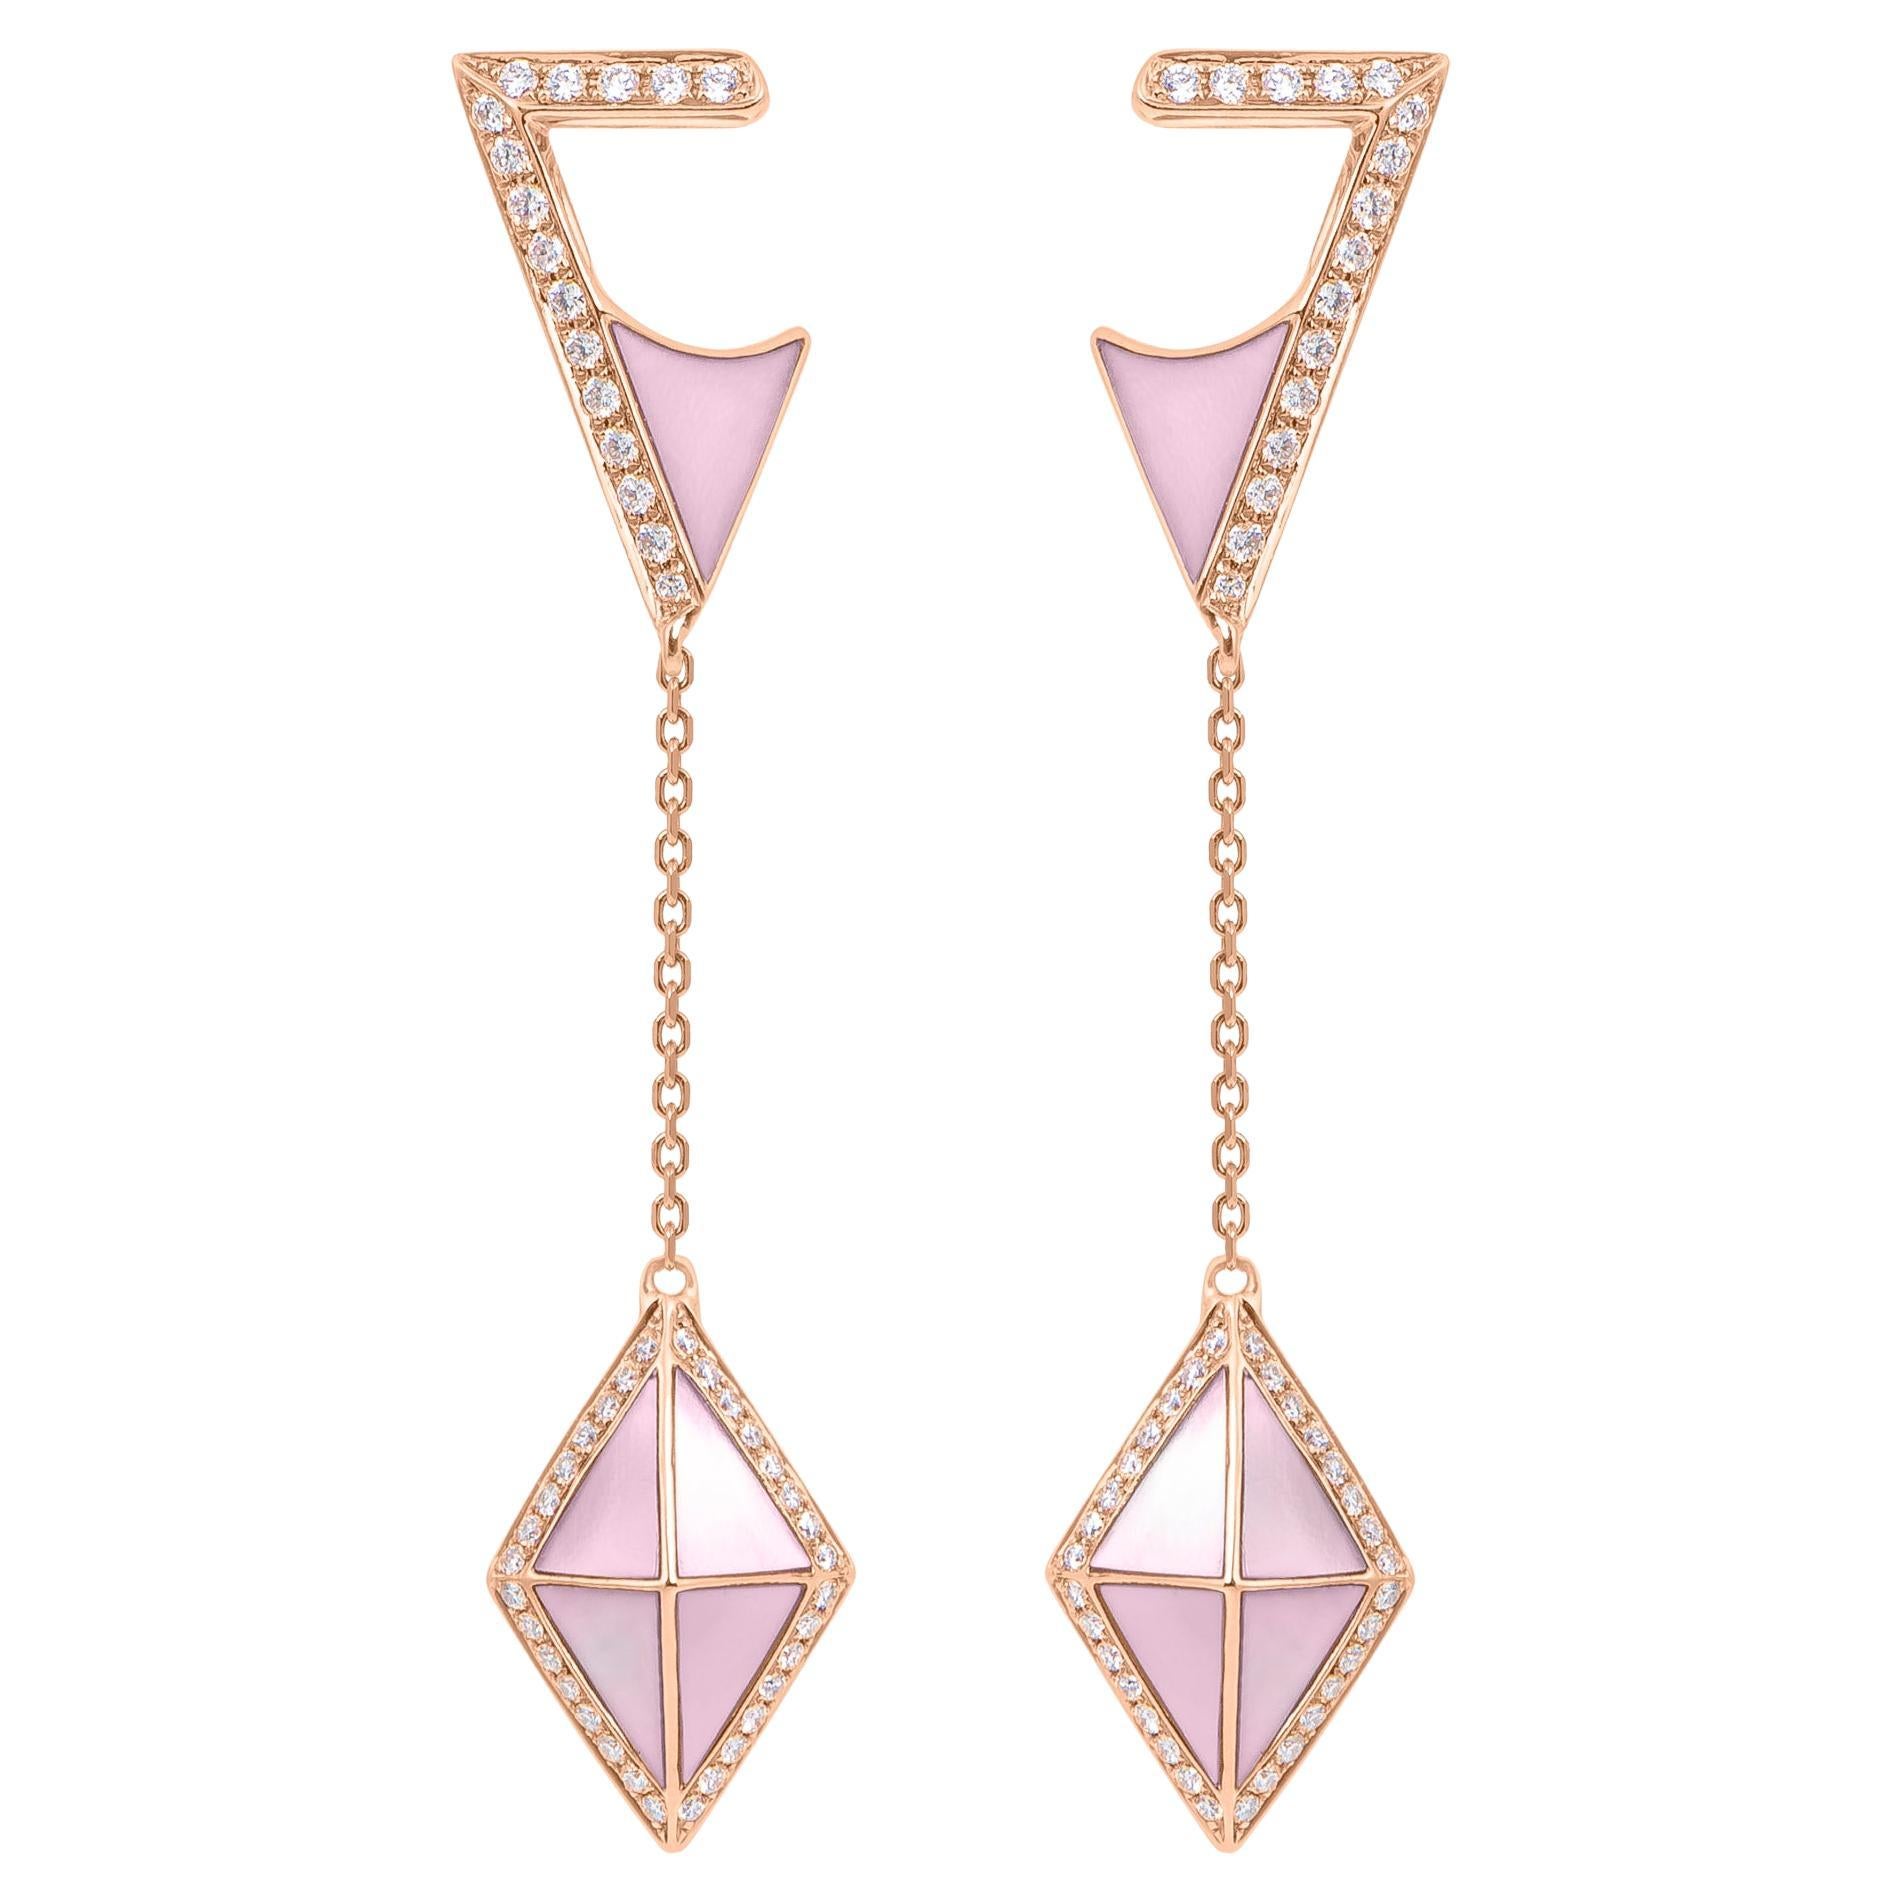 Tetra Tilt Drop Earrings with Pink Mother of Pearl & Diamonds in 18k Rose Gold For Sale